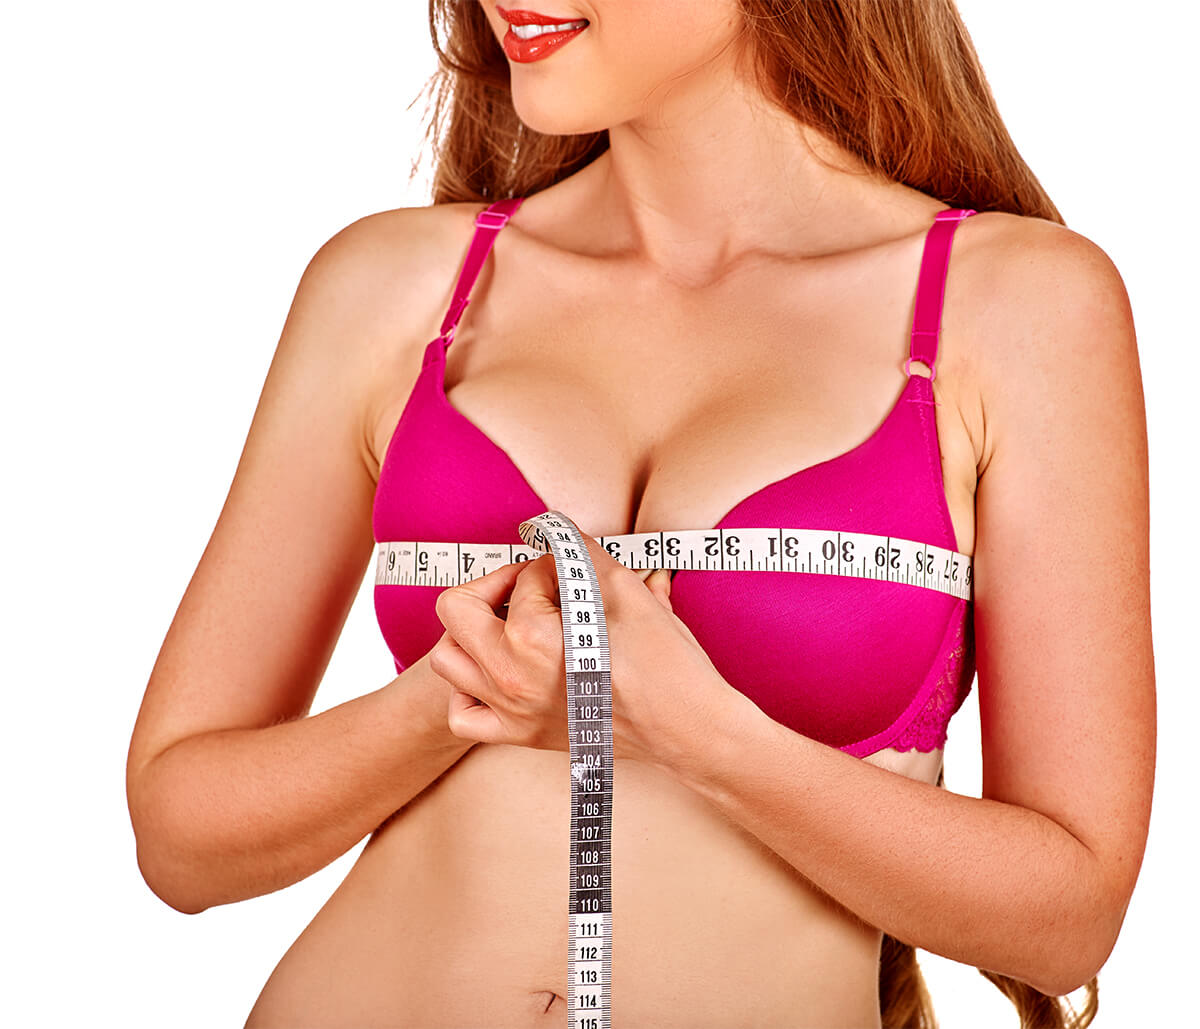 Breast Augmentation in Fort Lee NJ - Natural Looking Implants